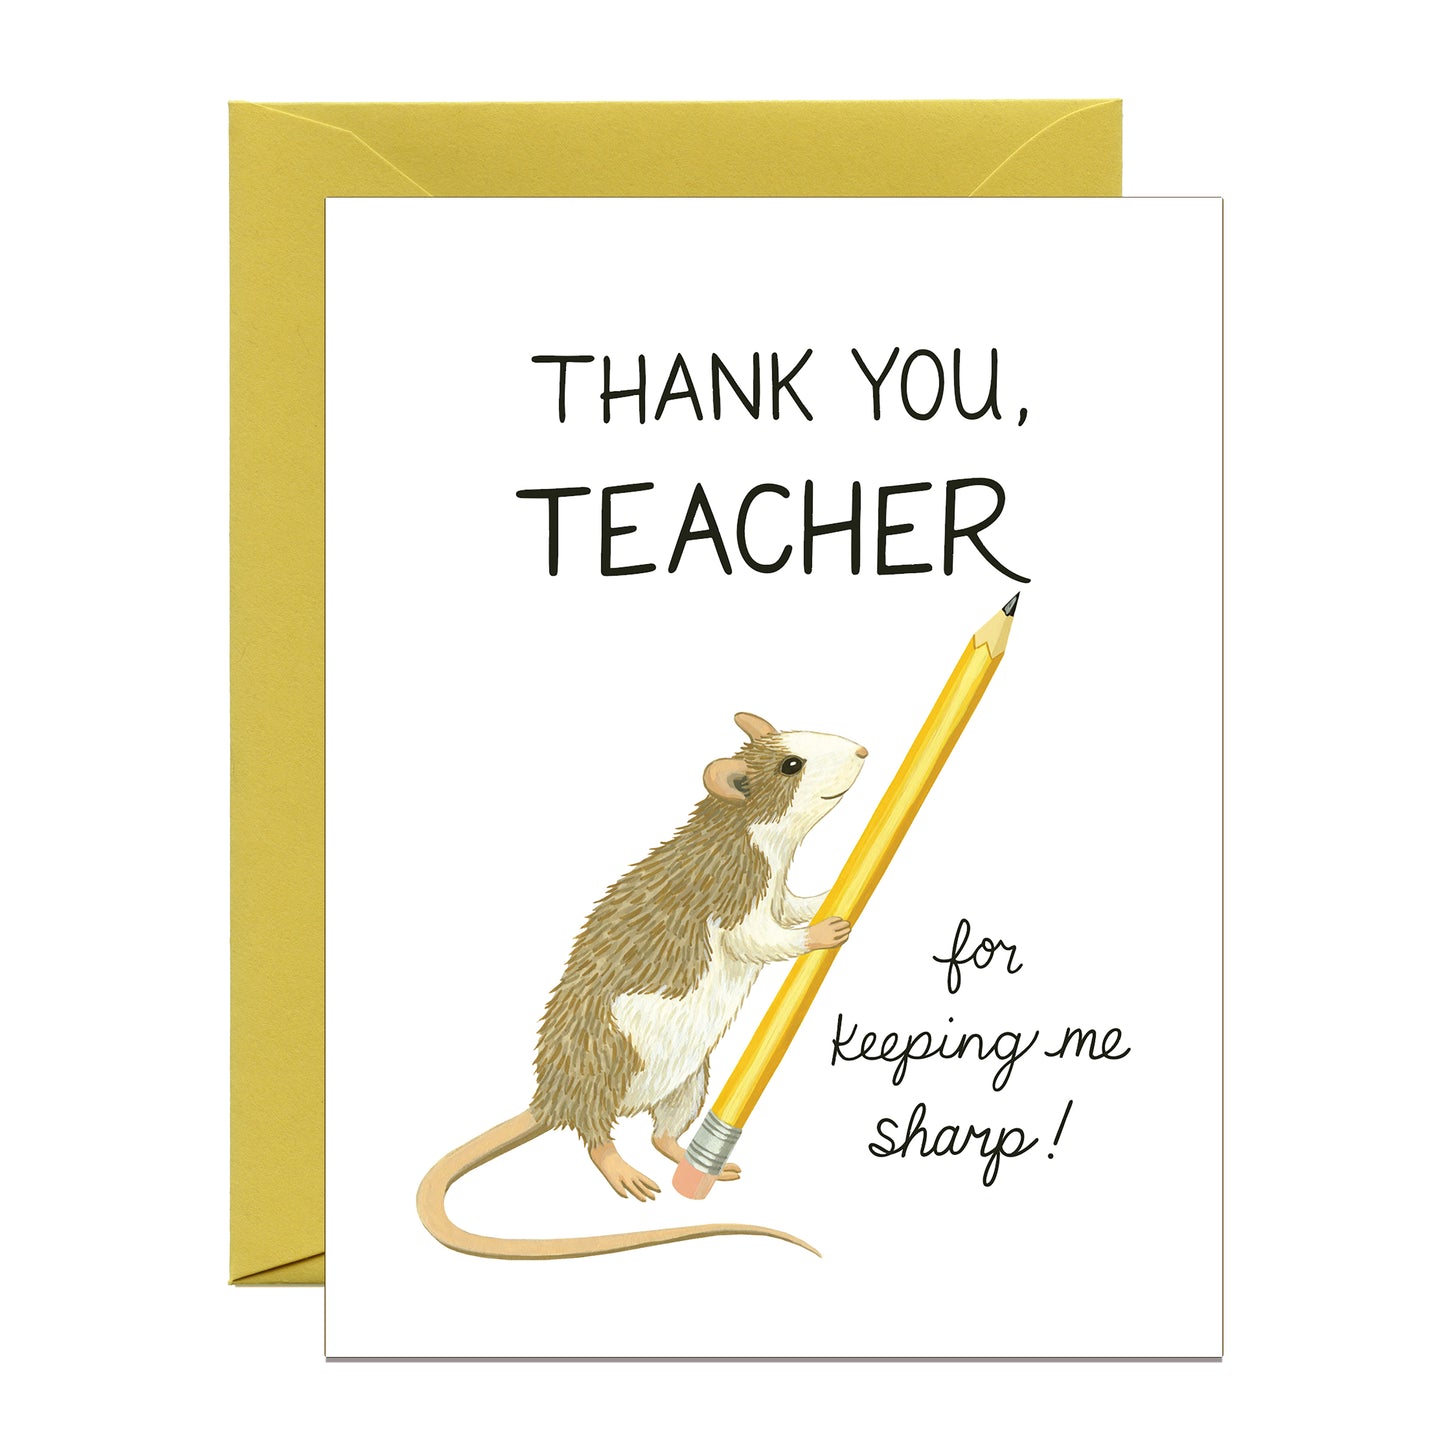 CUTE MOUSE WITH PENCIL - TEACHER APPRECIATION GREETING CARD